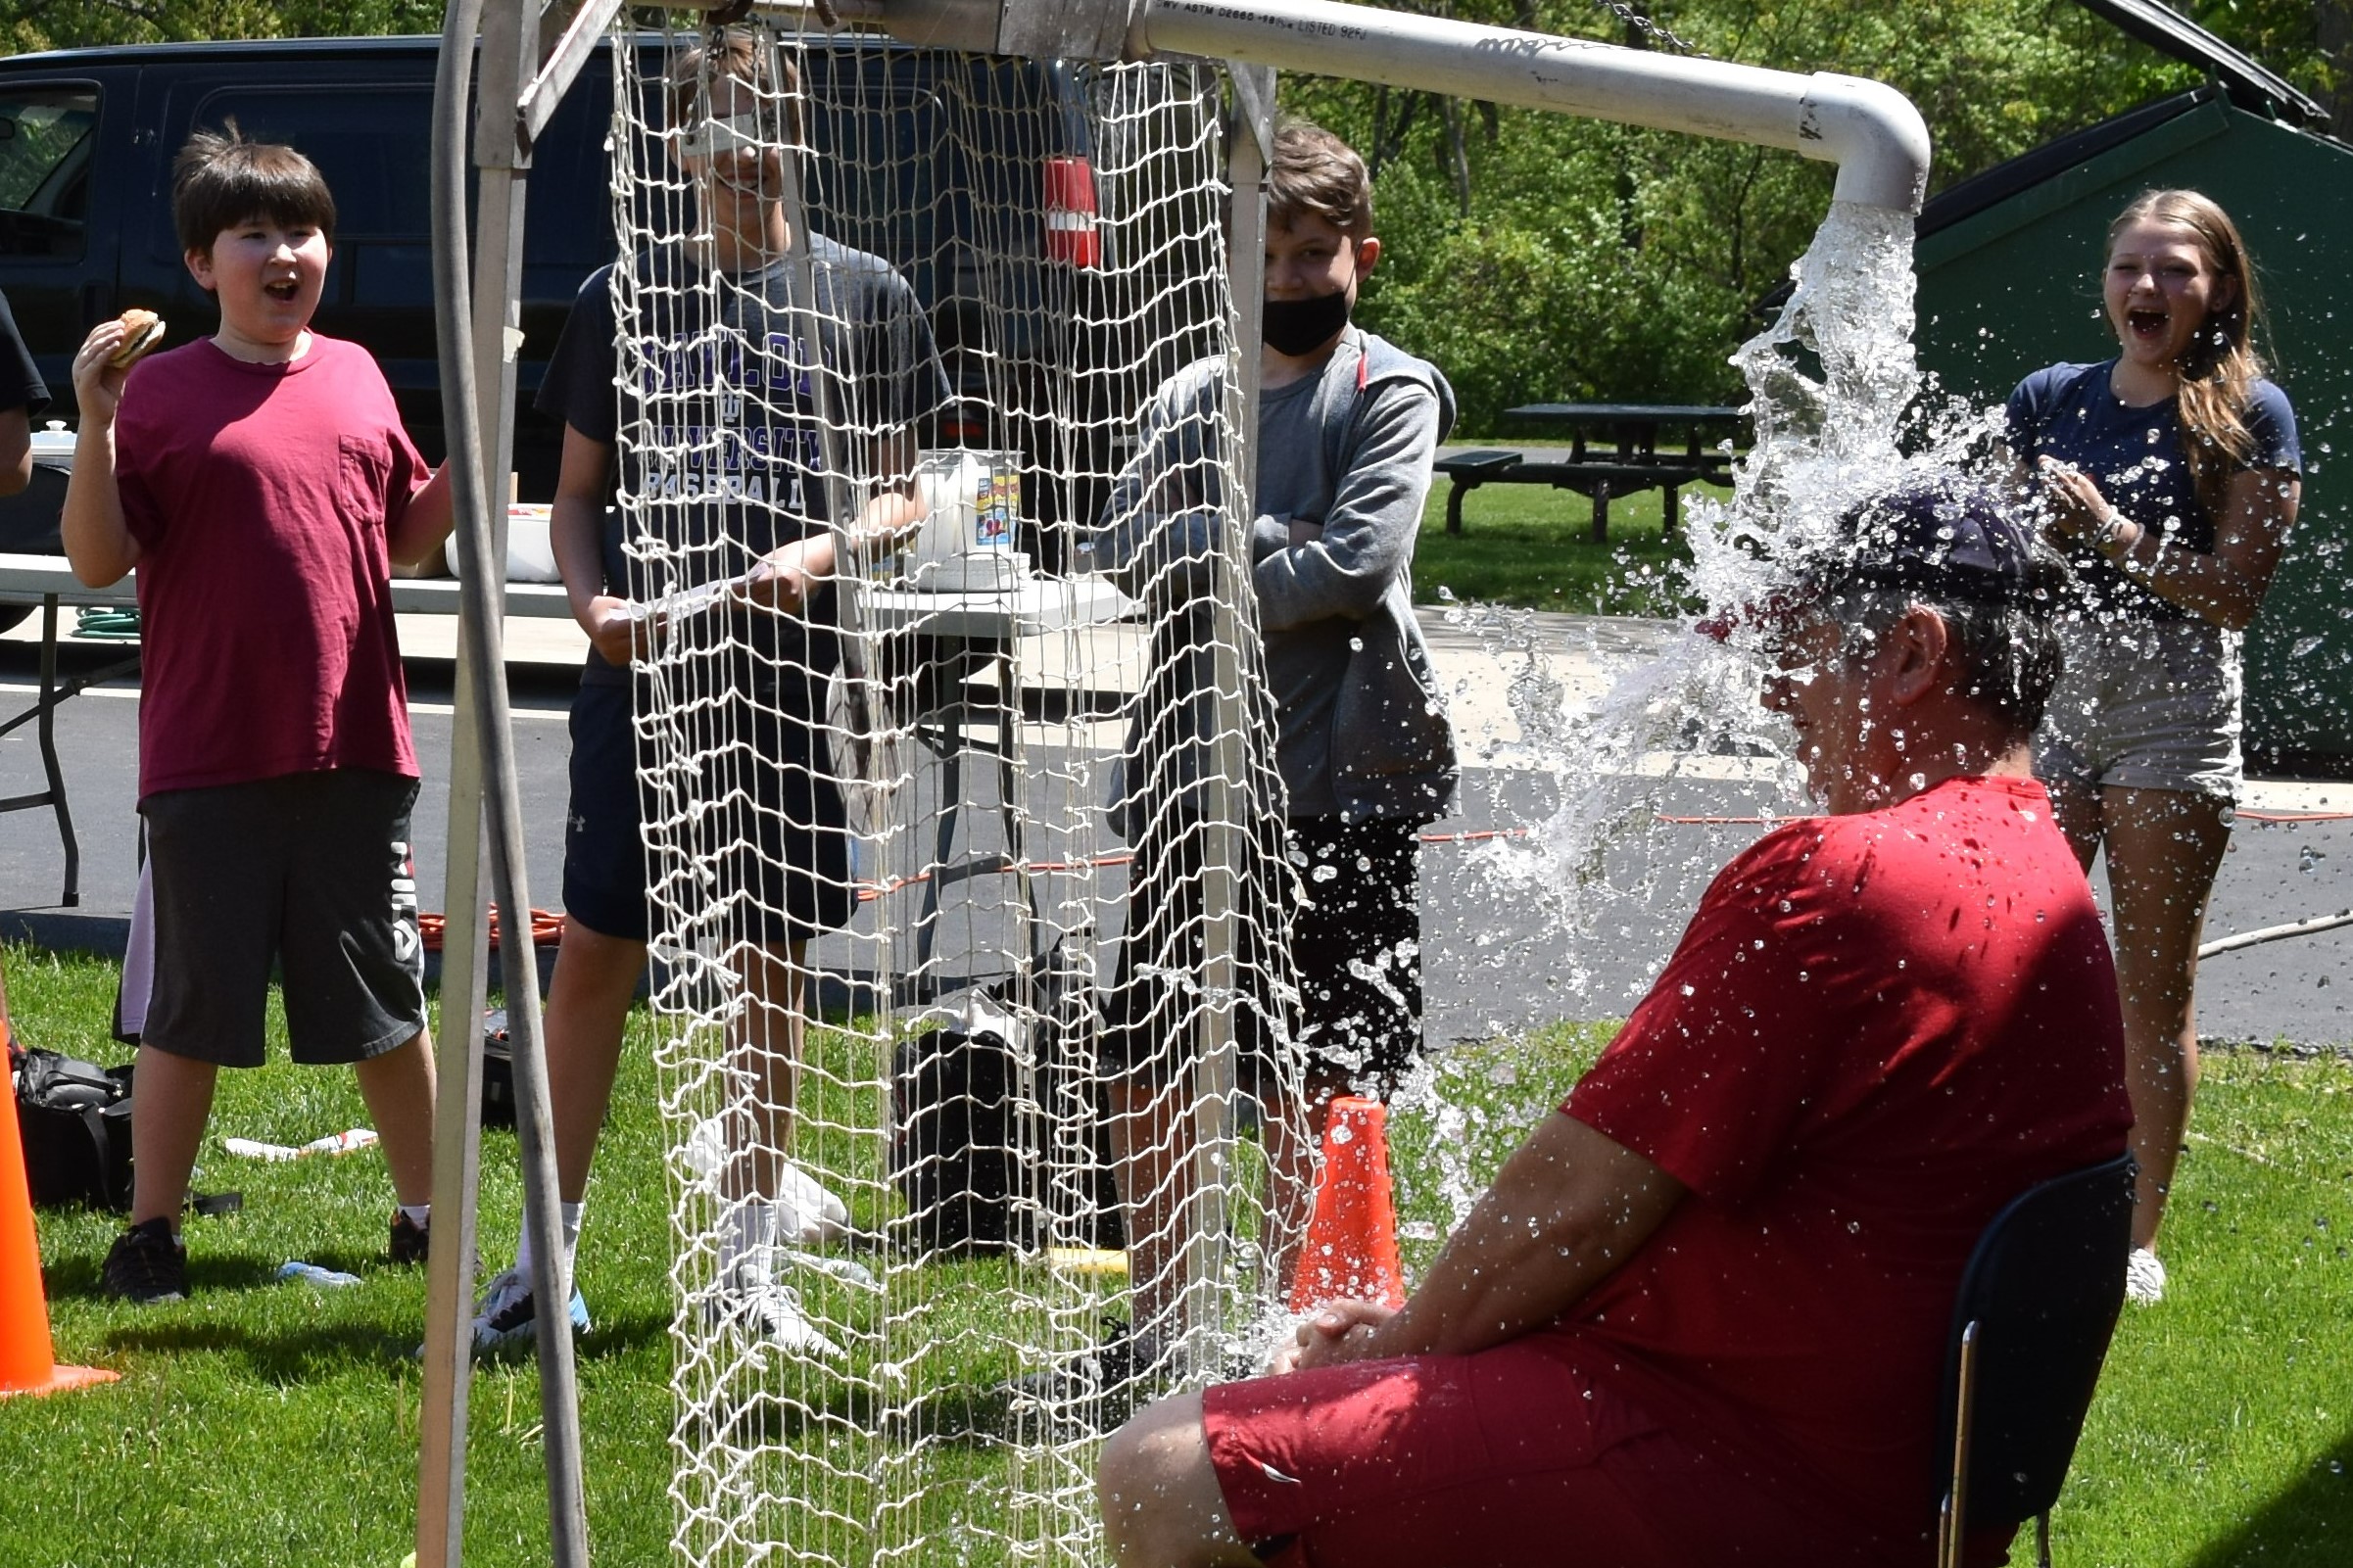 Dr. Fitzgerald getting doused with water from a reverse dunk tank while students happily watch in the background